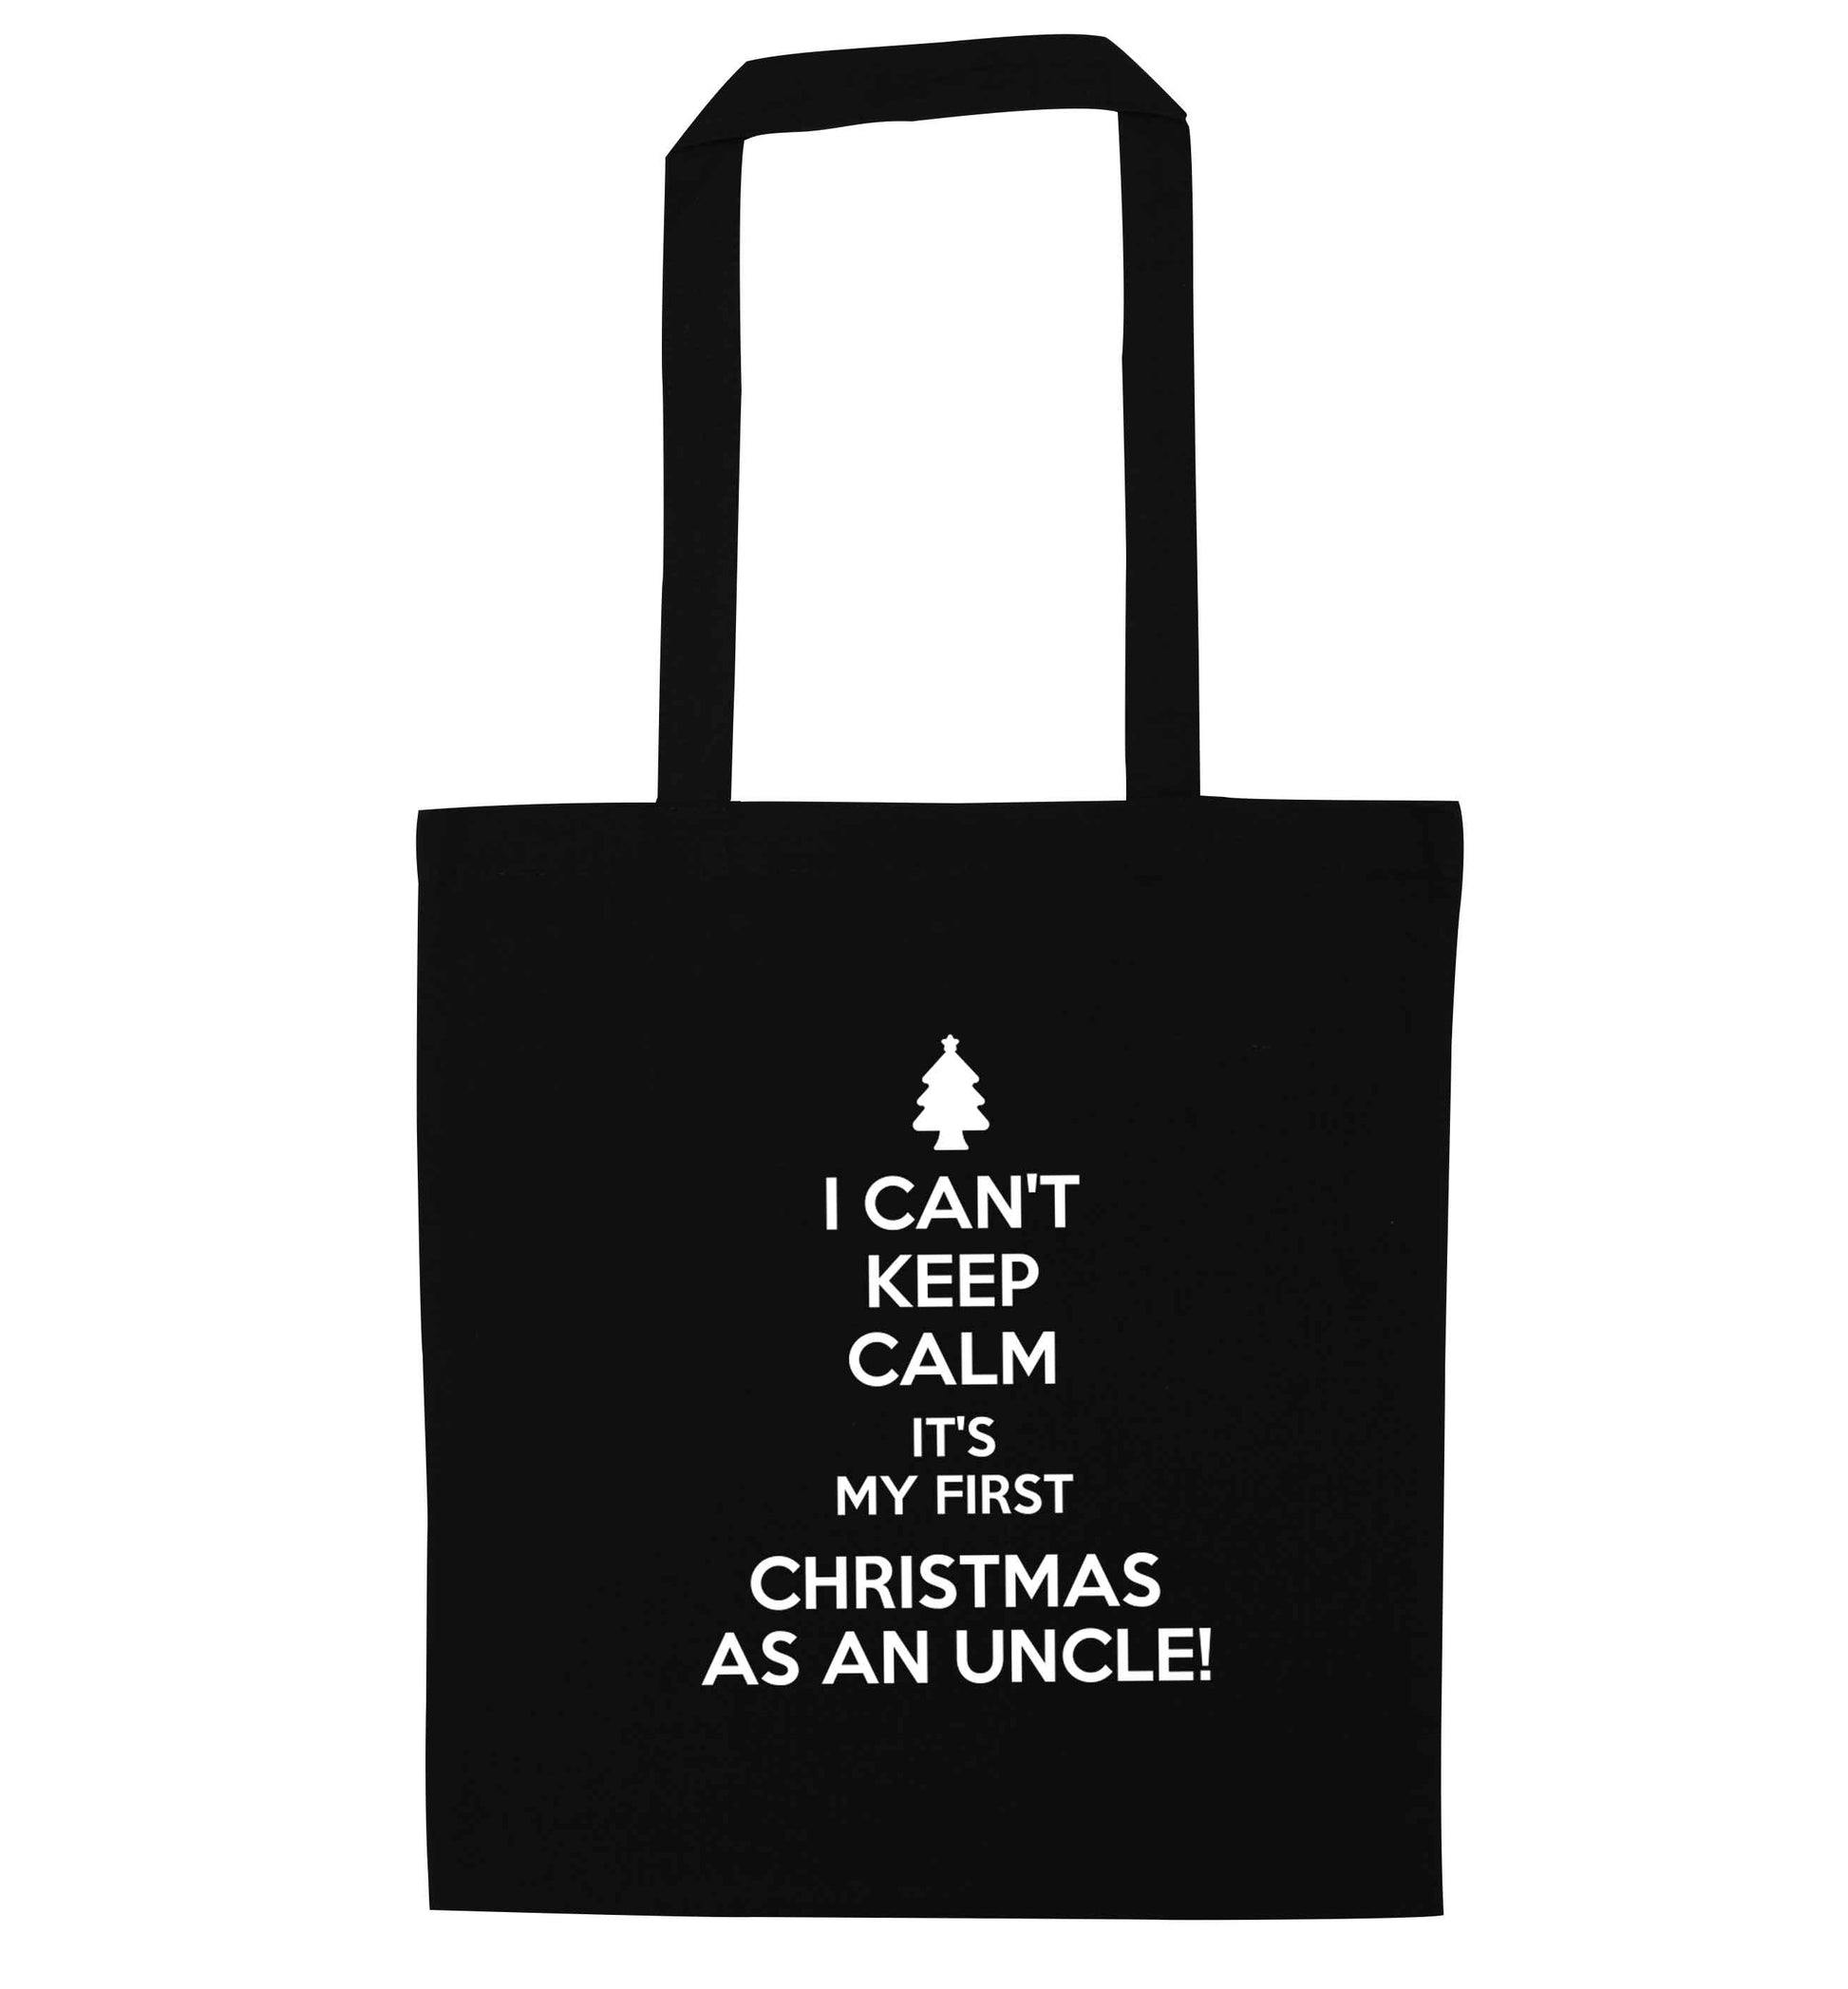 I can't keep calm it's my first Christmas as an uncle! black tote bag